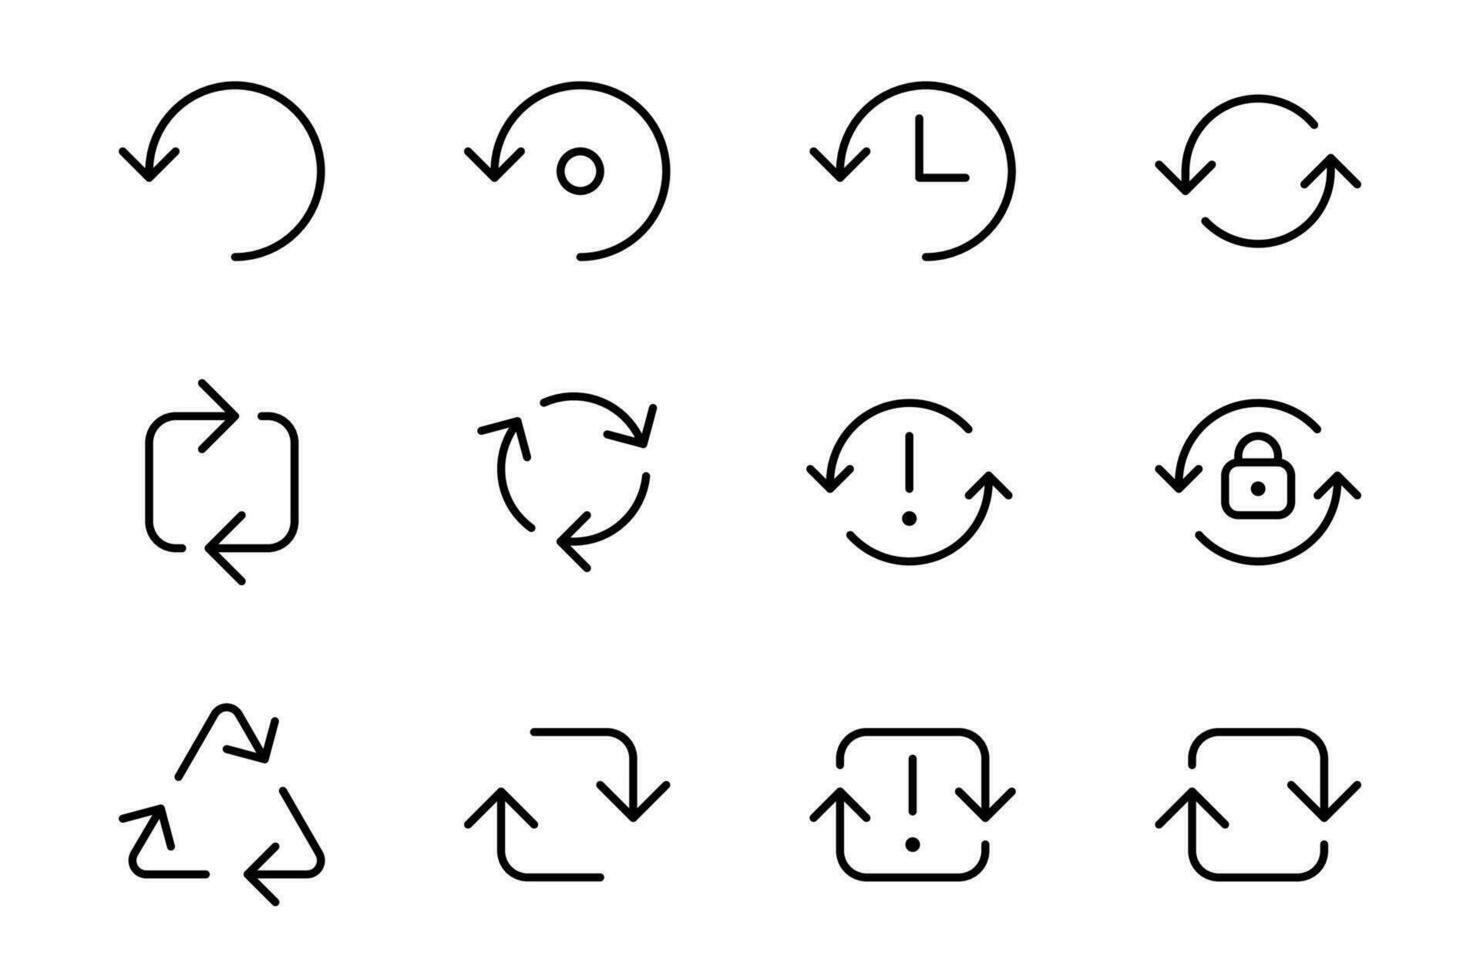 Synchronization, sync, circle arrow icon set. circular arrow icon, refresh, reload arrow icon symbol sign, vector illustration. For the use of UI and mobile app, web site interface.